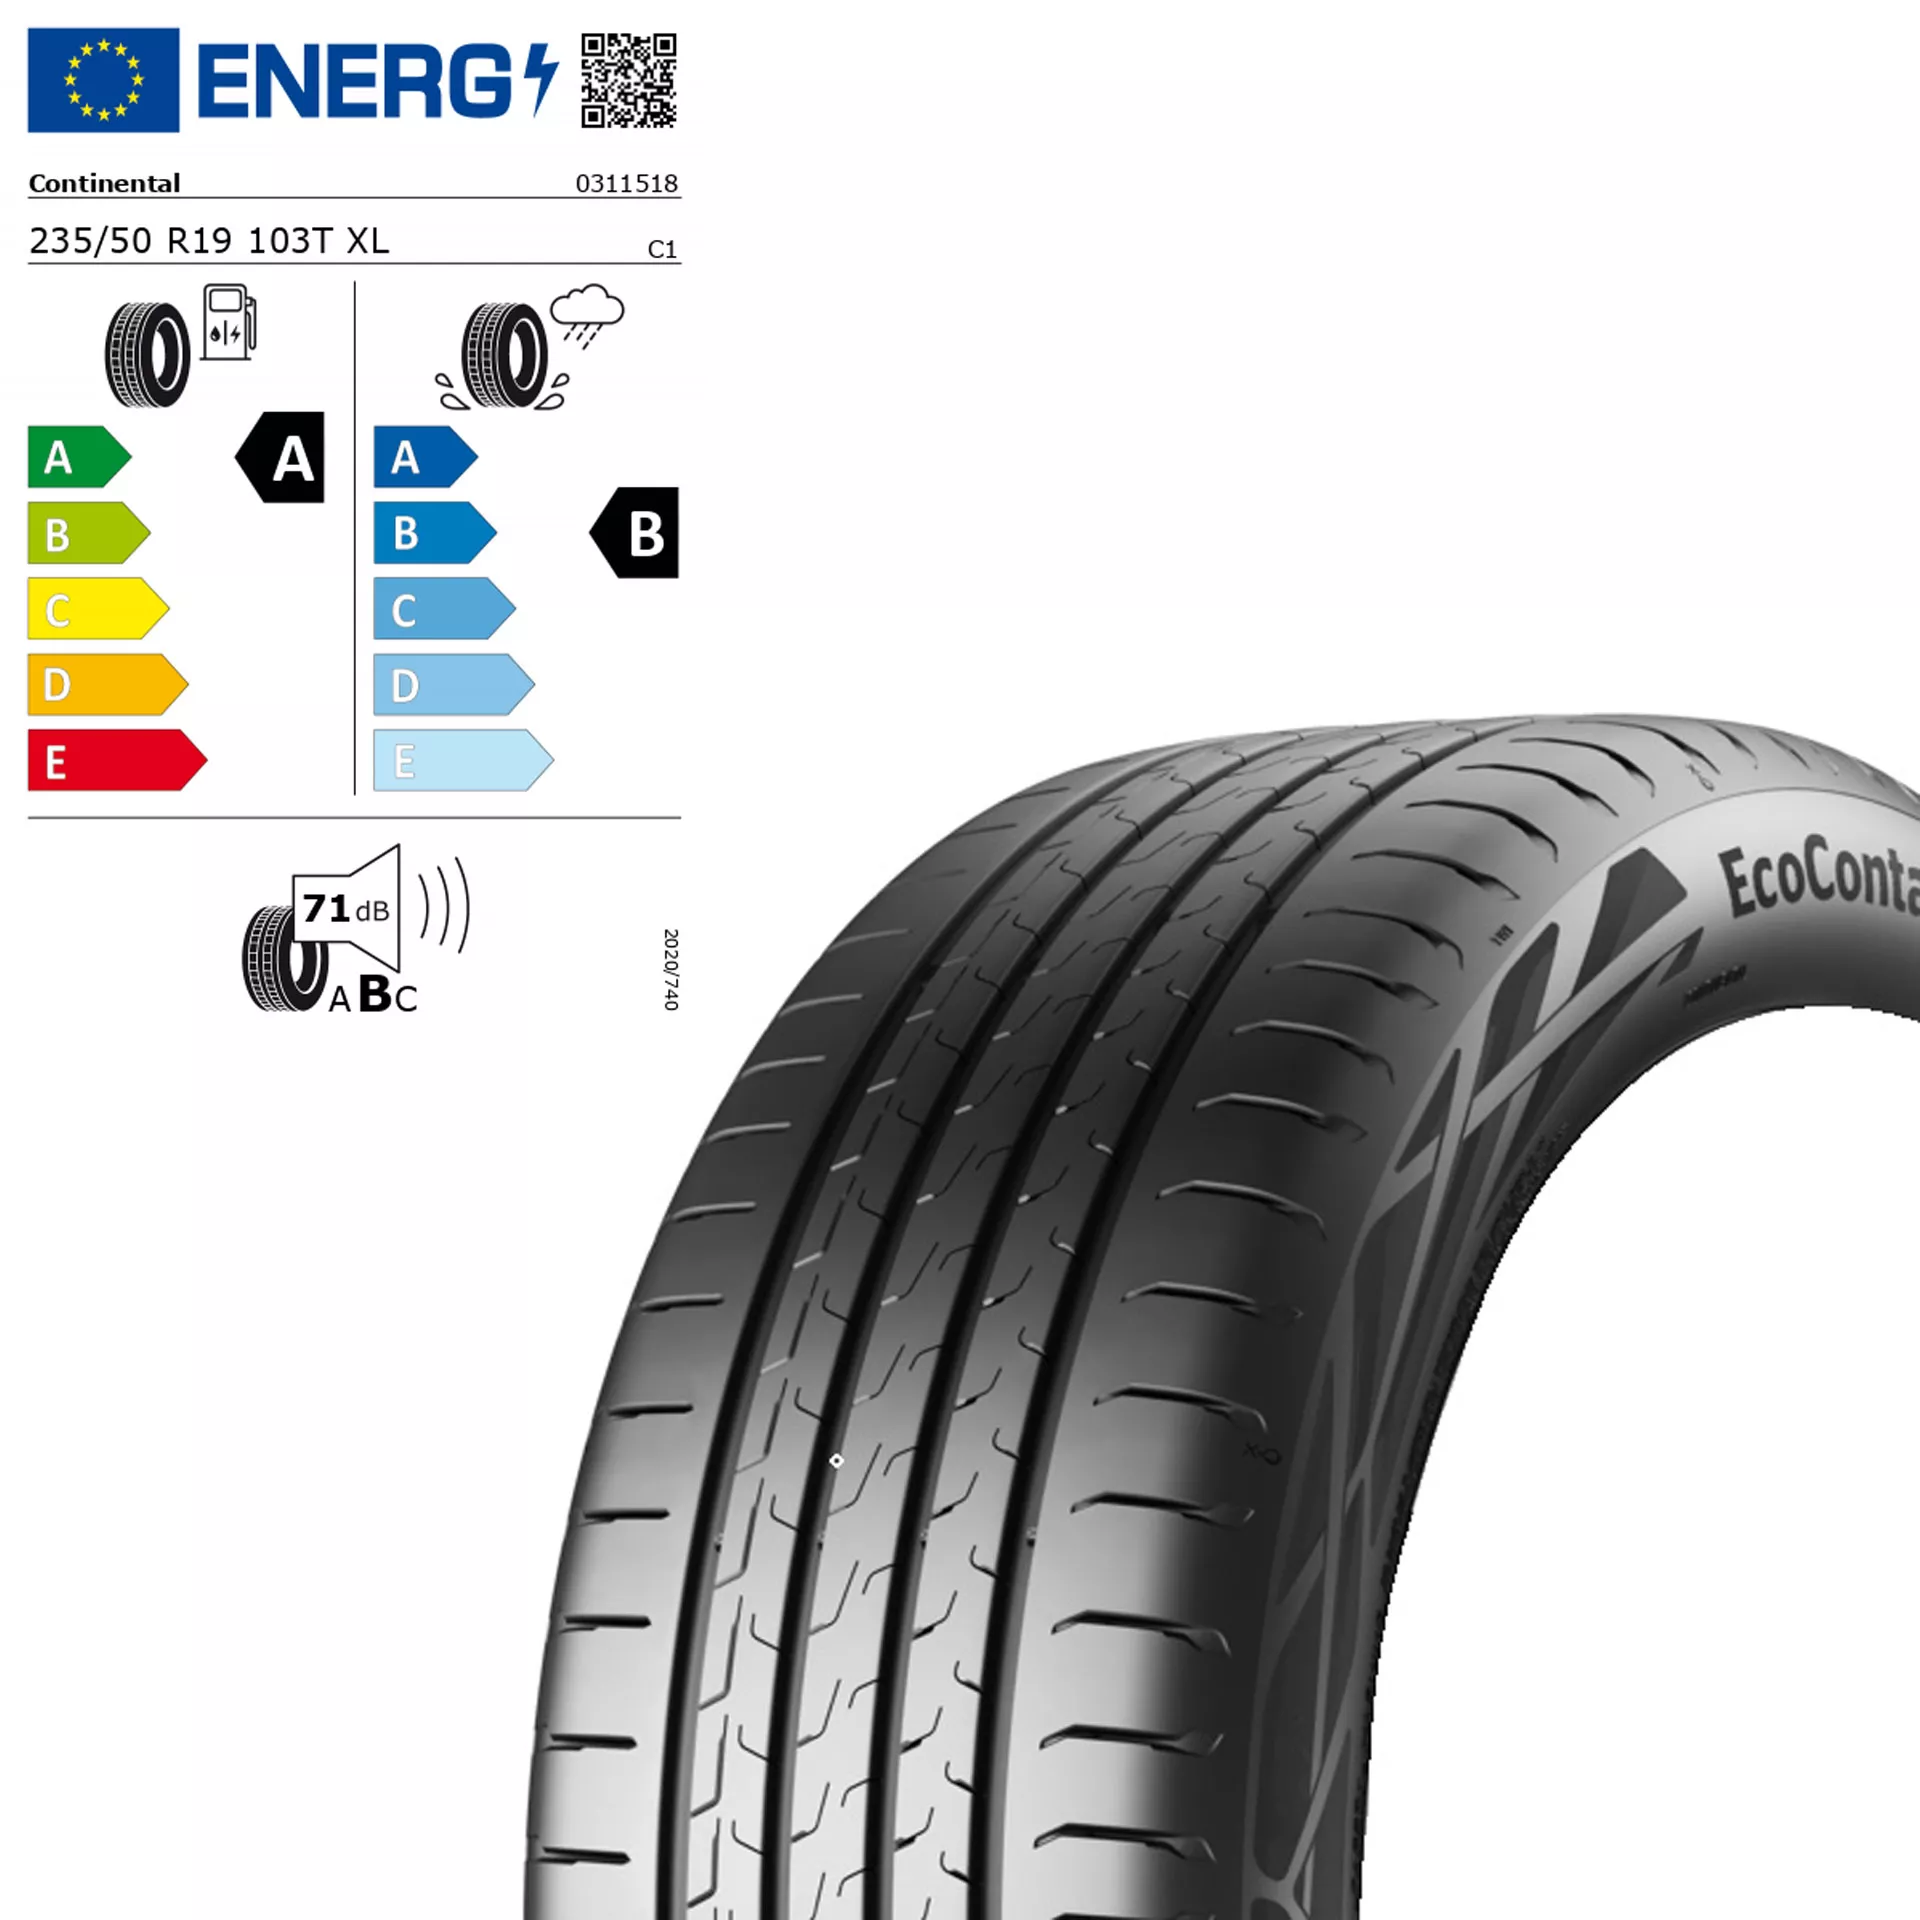 235/50 R19 103T XL Continental EcoContact 6 MO Sommerreifen Q440021110960